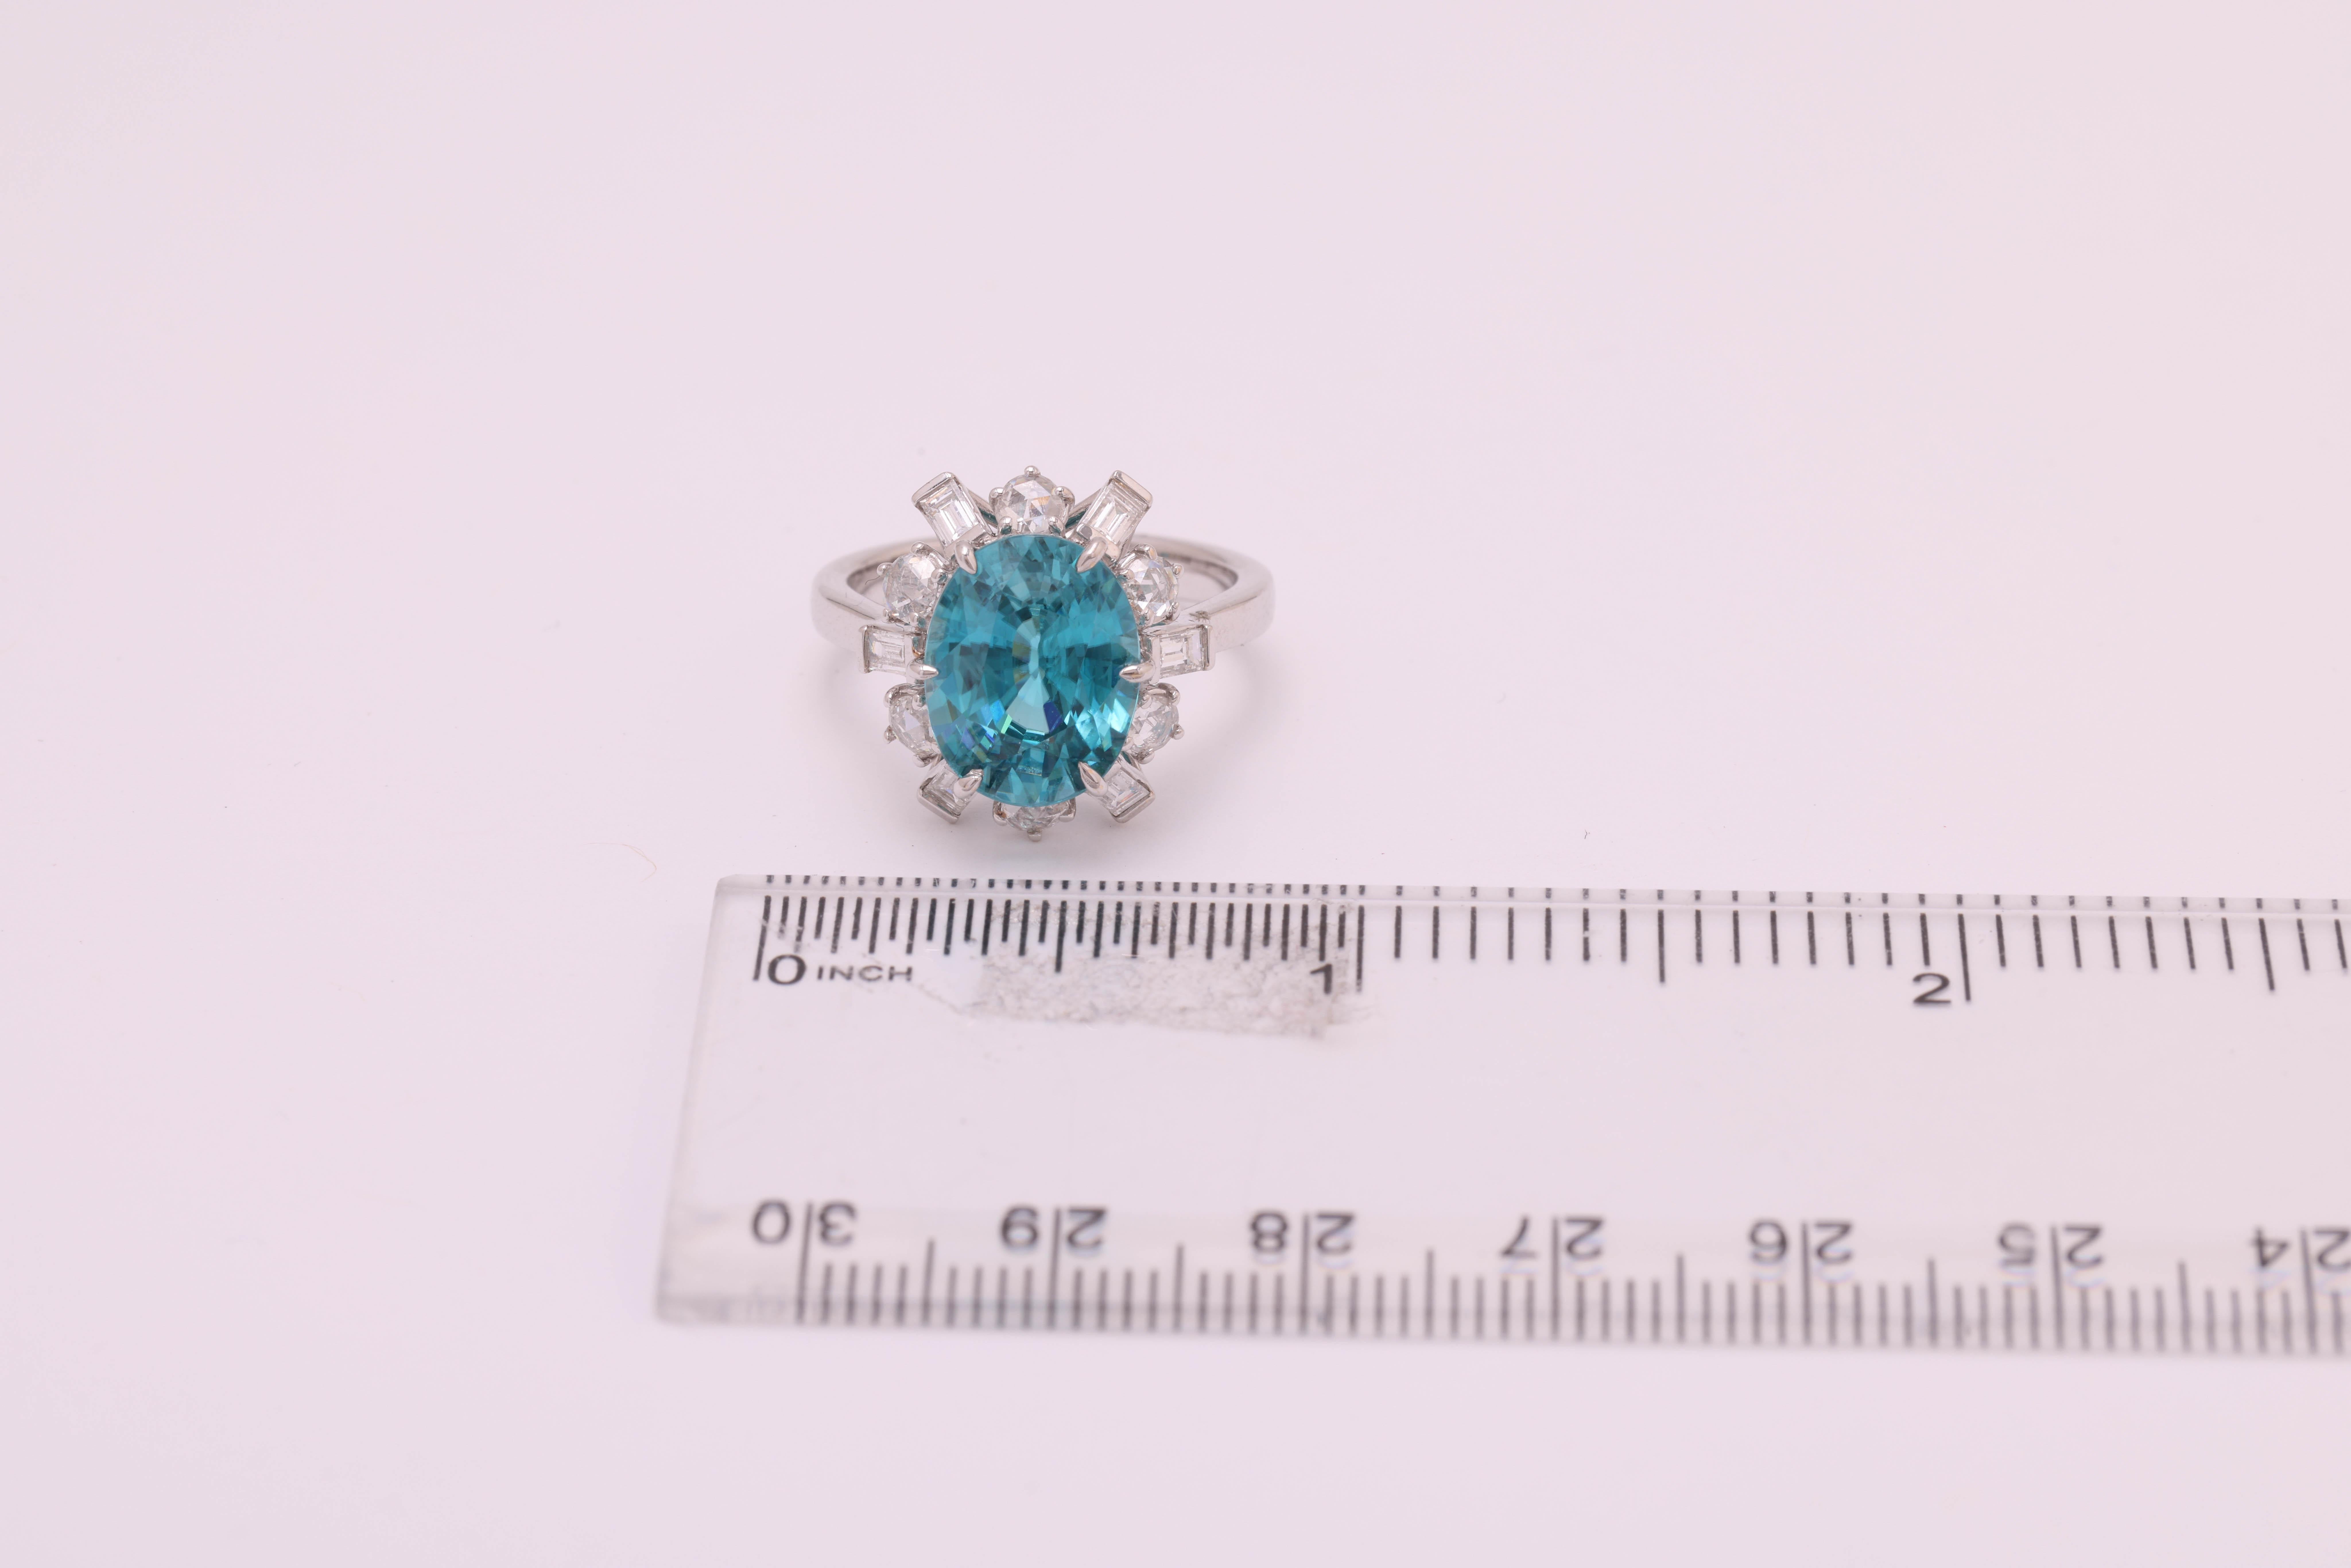 GIA Certified 6.85 Carat Oval Cut Blue Zircon and Diamond Ring in 18W ref1313 For Sale 2